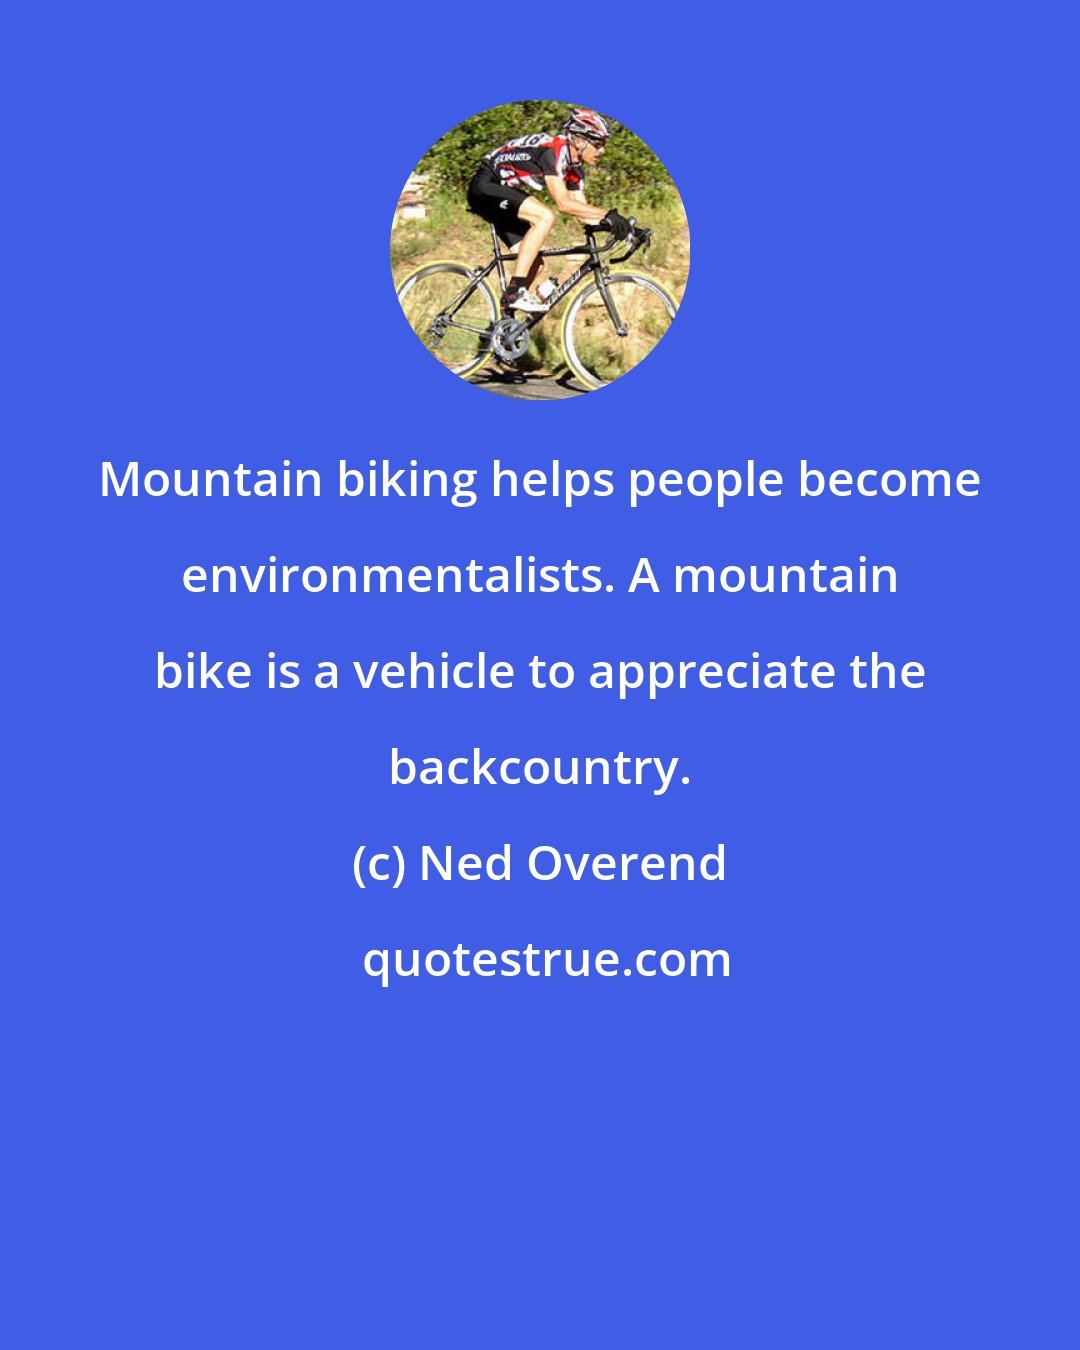 Ned Overend: Mountain biking helps people become environmentalists. A mountain bike is a vehicle to appreciate the backcountry.